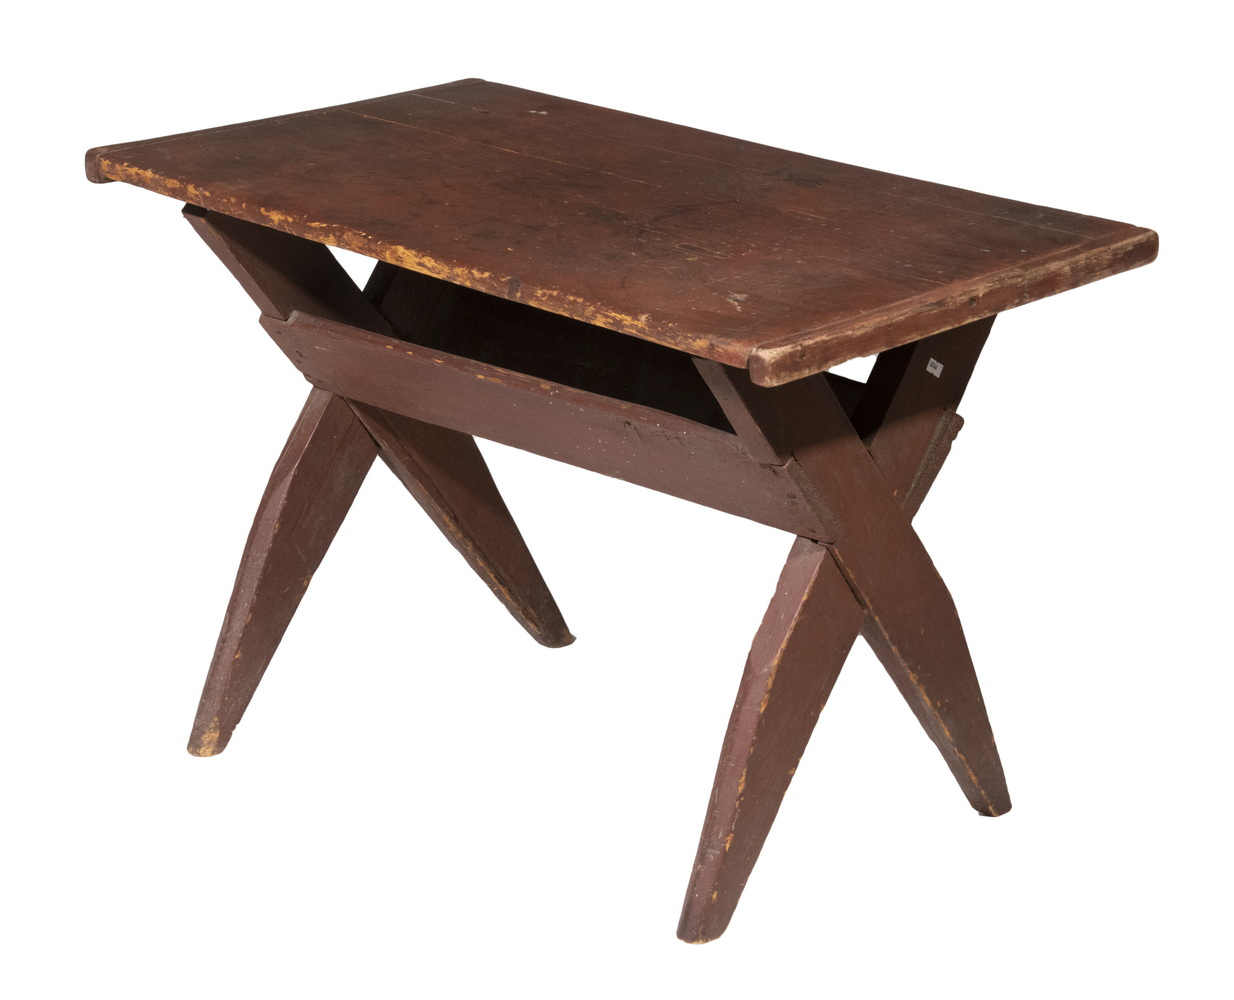 EARLY SAWBUCK TABLE 18th c. Small Red